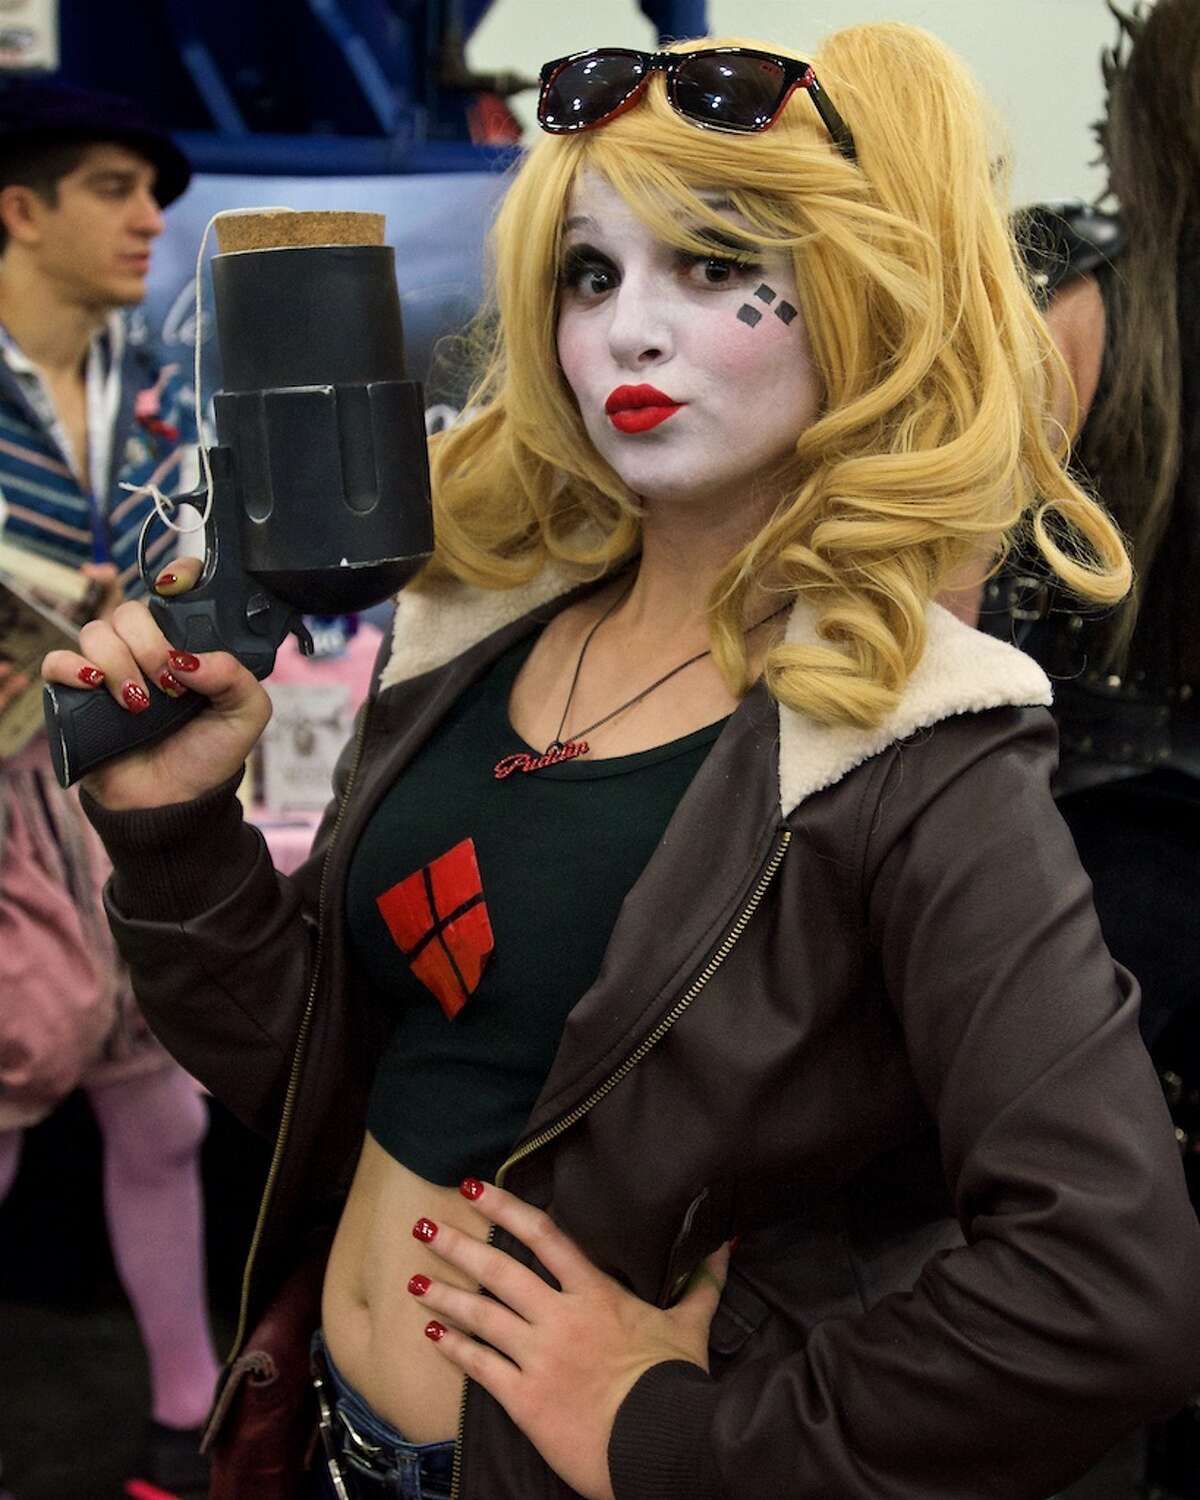 HOUSTON - HARLEY QUINN:A fan dressed as Harley Quinn poses for a photo during Comicpalooza, at the George R. Brown Convention Center, Saturday, June 18, 2016, in Houston.